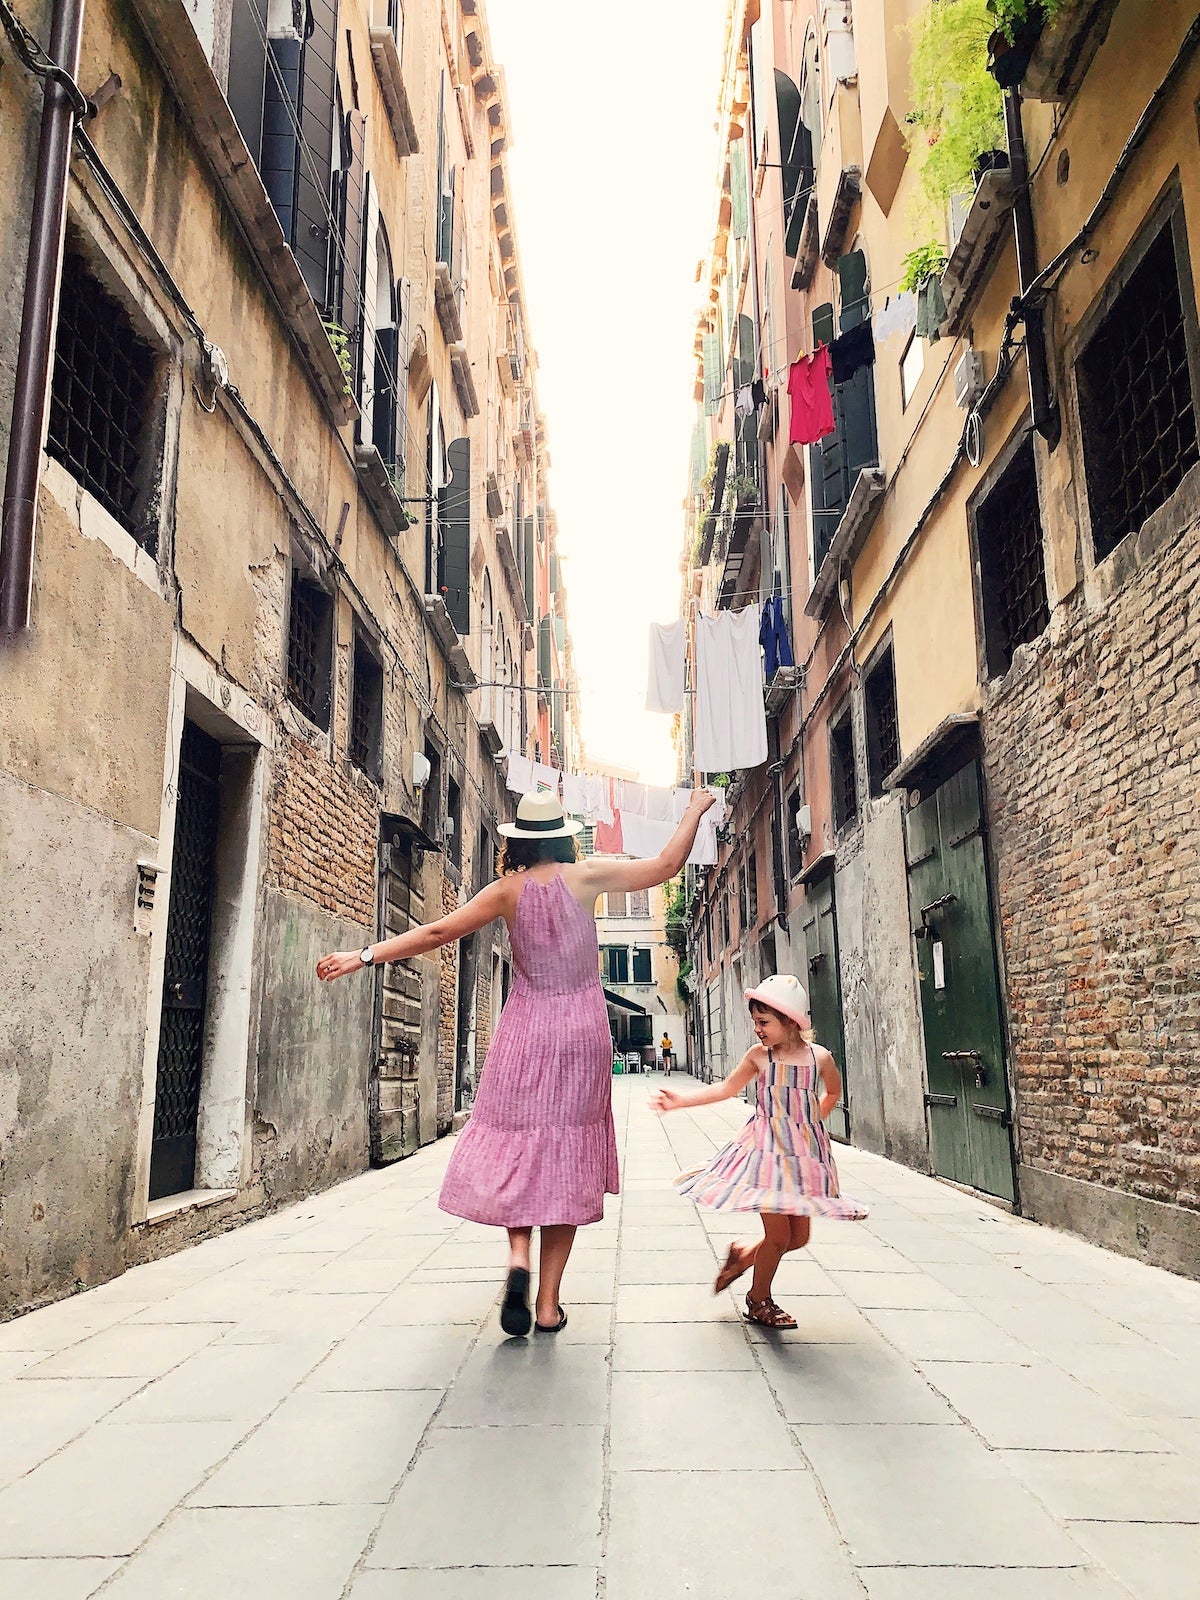 A mother and daughter dance in the streets of Italy